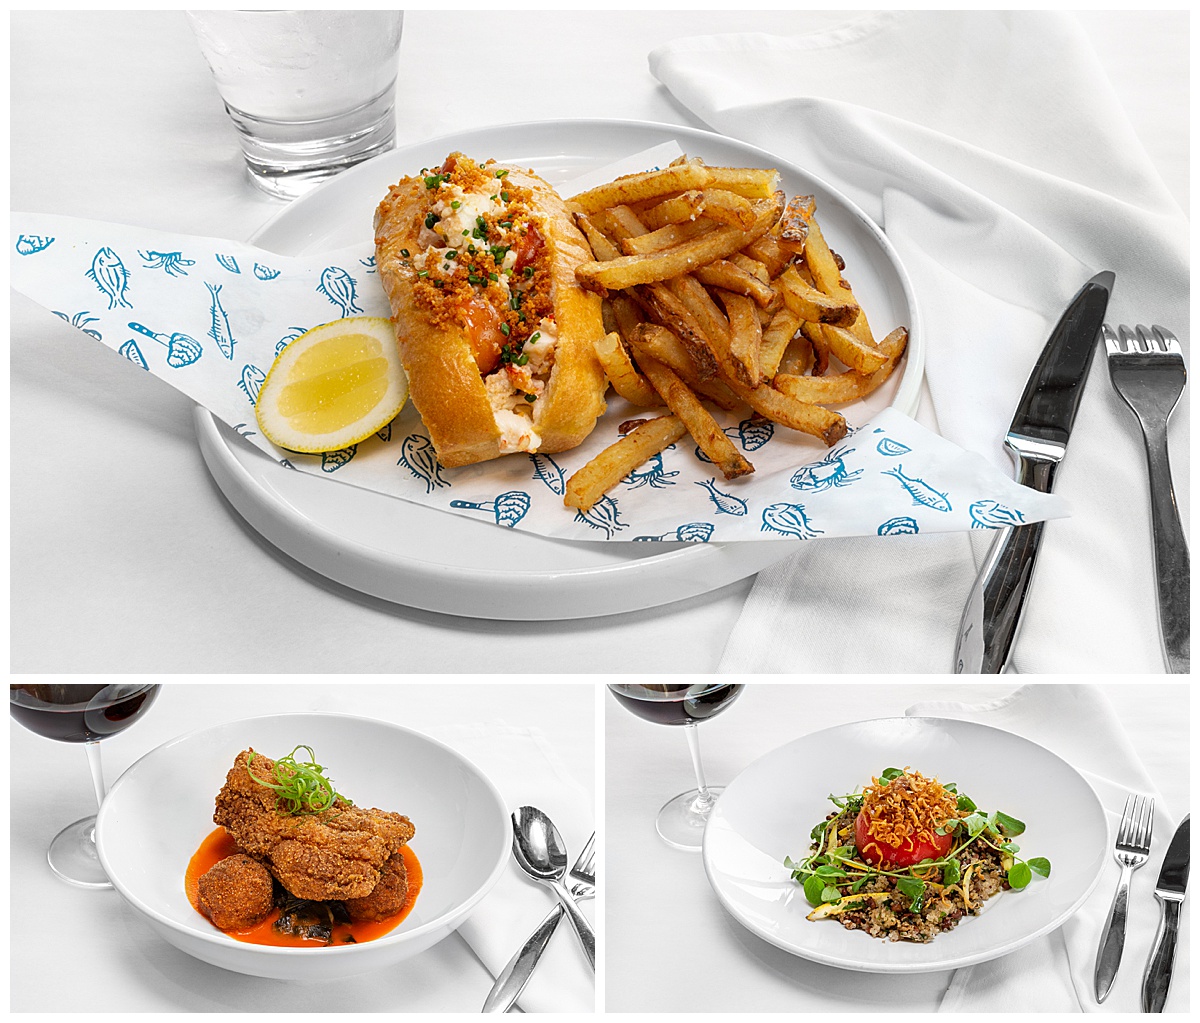 Main dishes from Jax Fish House & Oyster Bar Restaurant sit on white plates with a white tablecloth, white napkins, water, wine, and silverware around them.